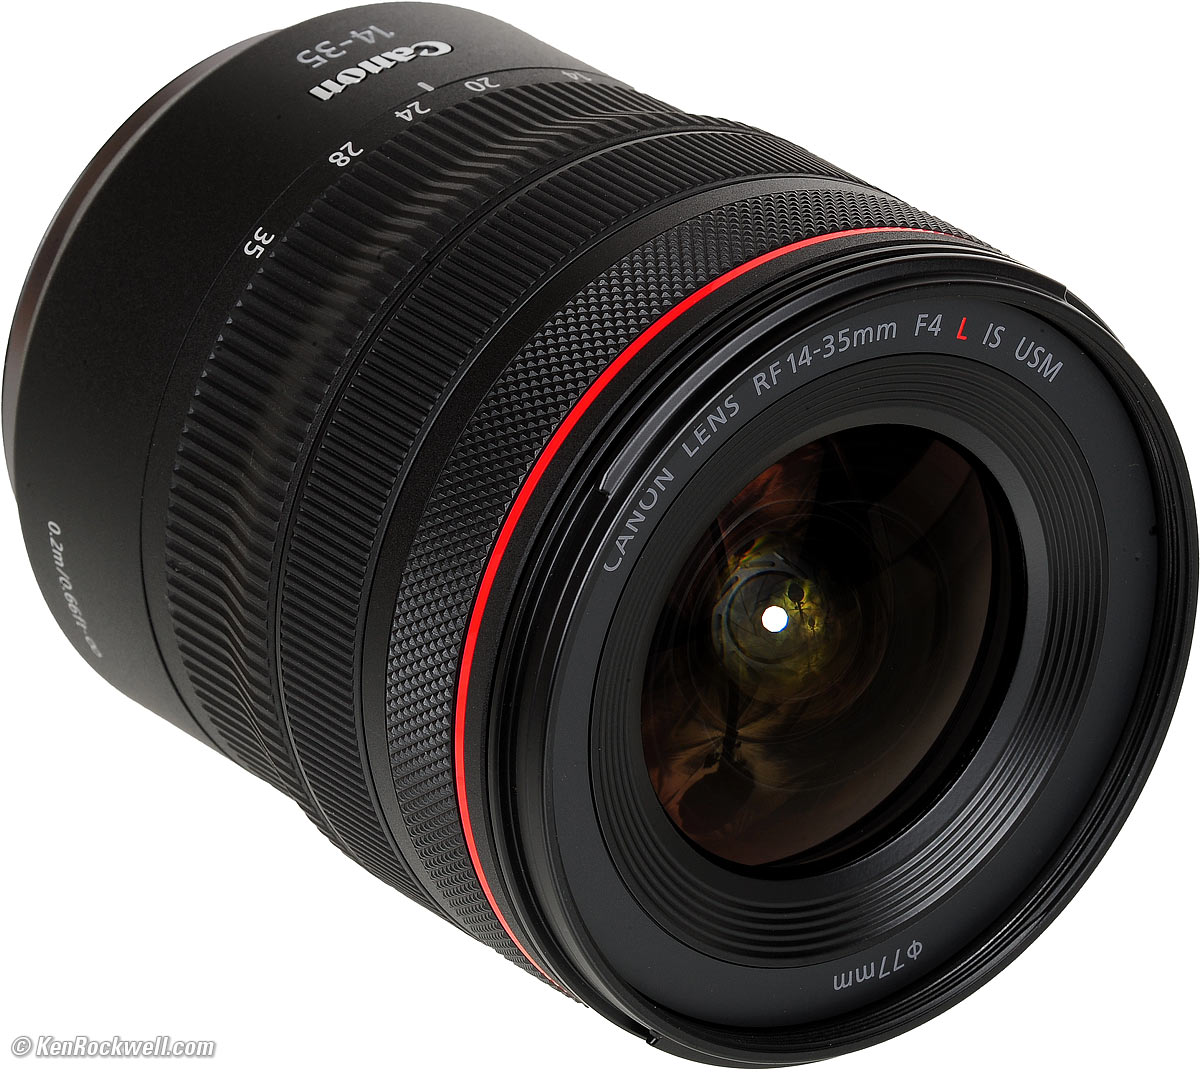 Canon RF 14-35mm f/4 L IS Review & Sample Images by Ken Rockwell